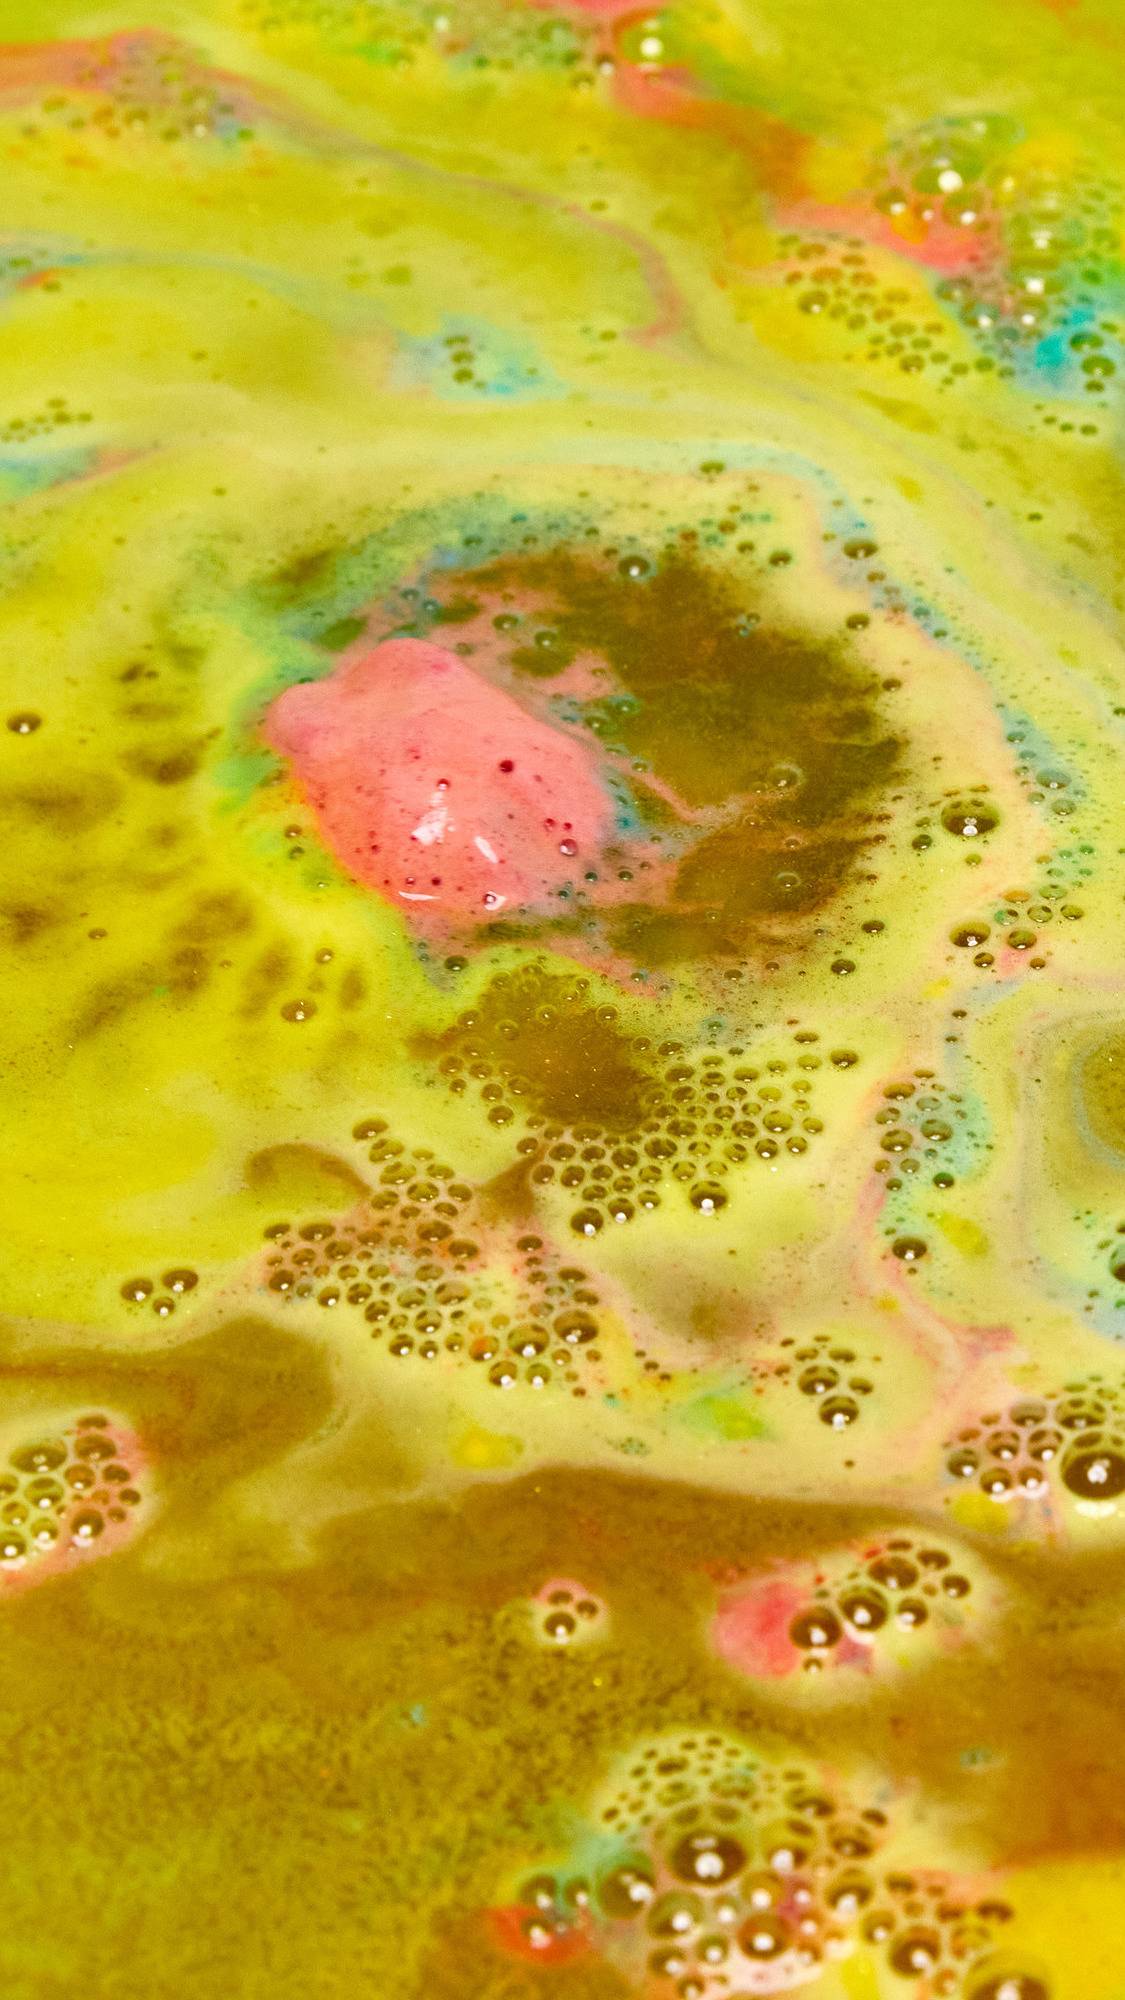 The Crackle bath bomb is slowly dissolving among shimmering golden waters with ribbons of blue and red throughout. 